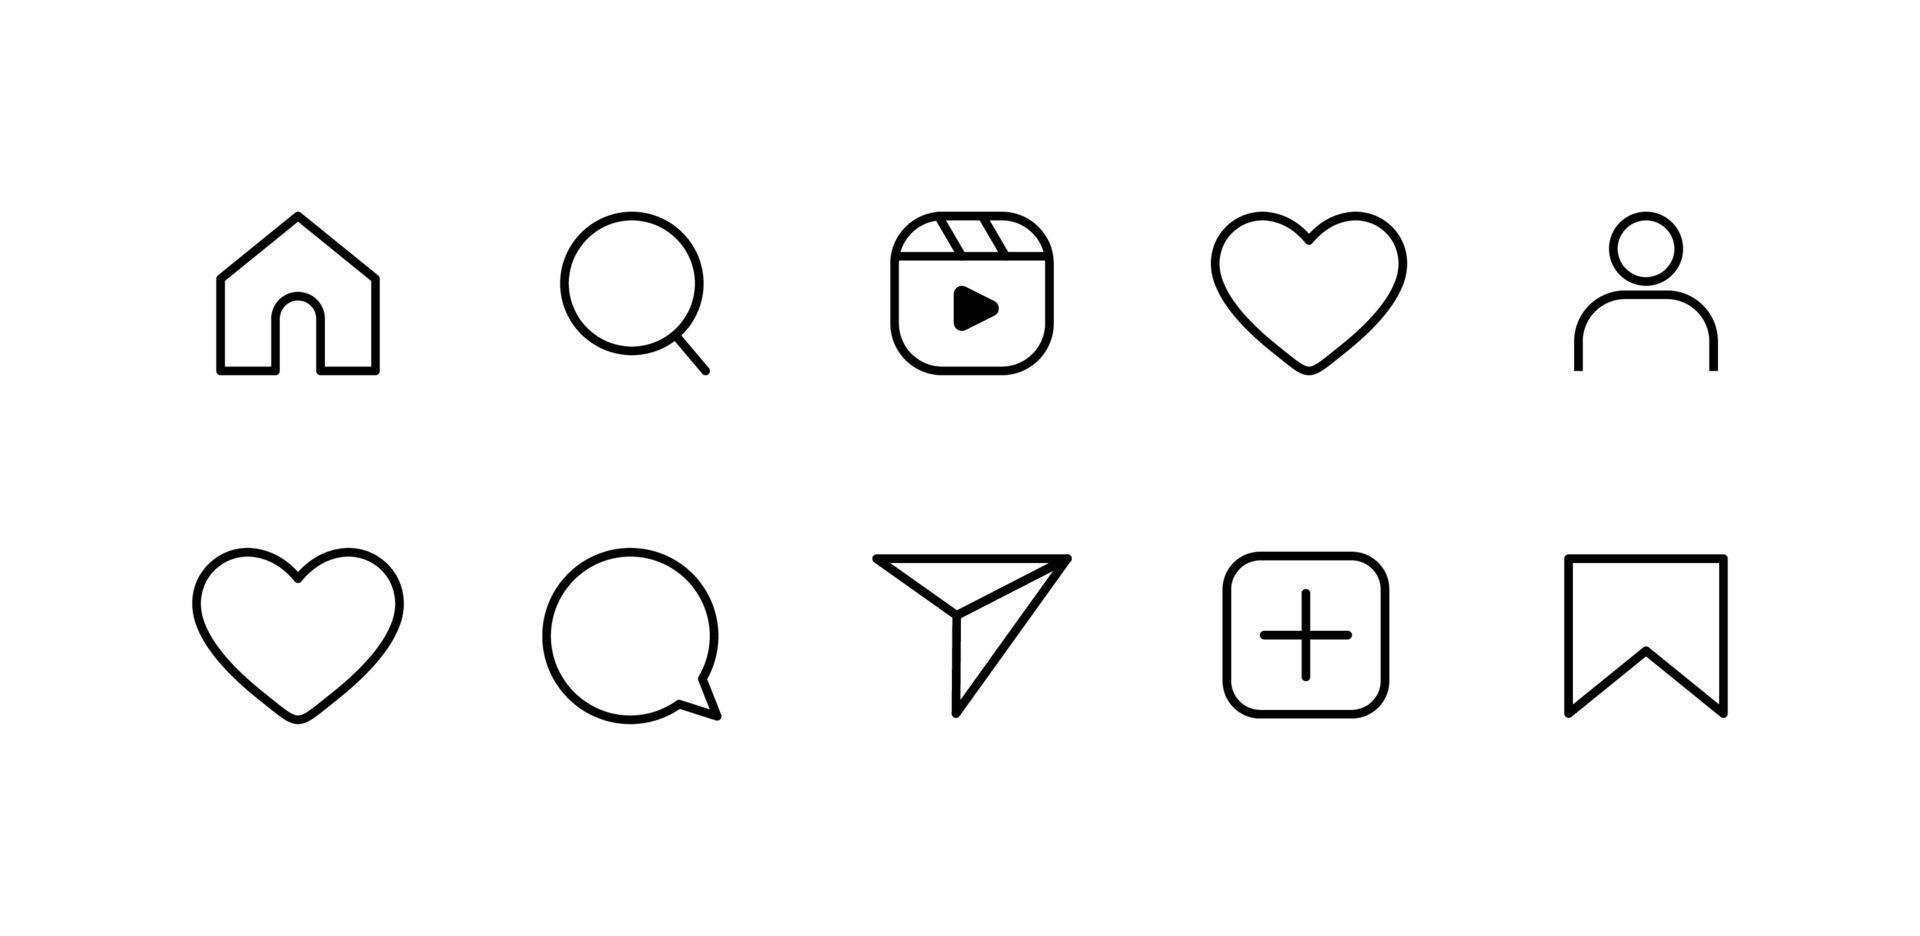 social media flat icons set notification speech bubble for like share save comment buttons Camera Search Heart Home web symbols and icons Free Vector